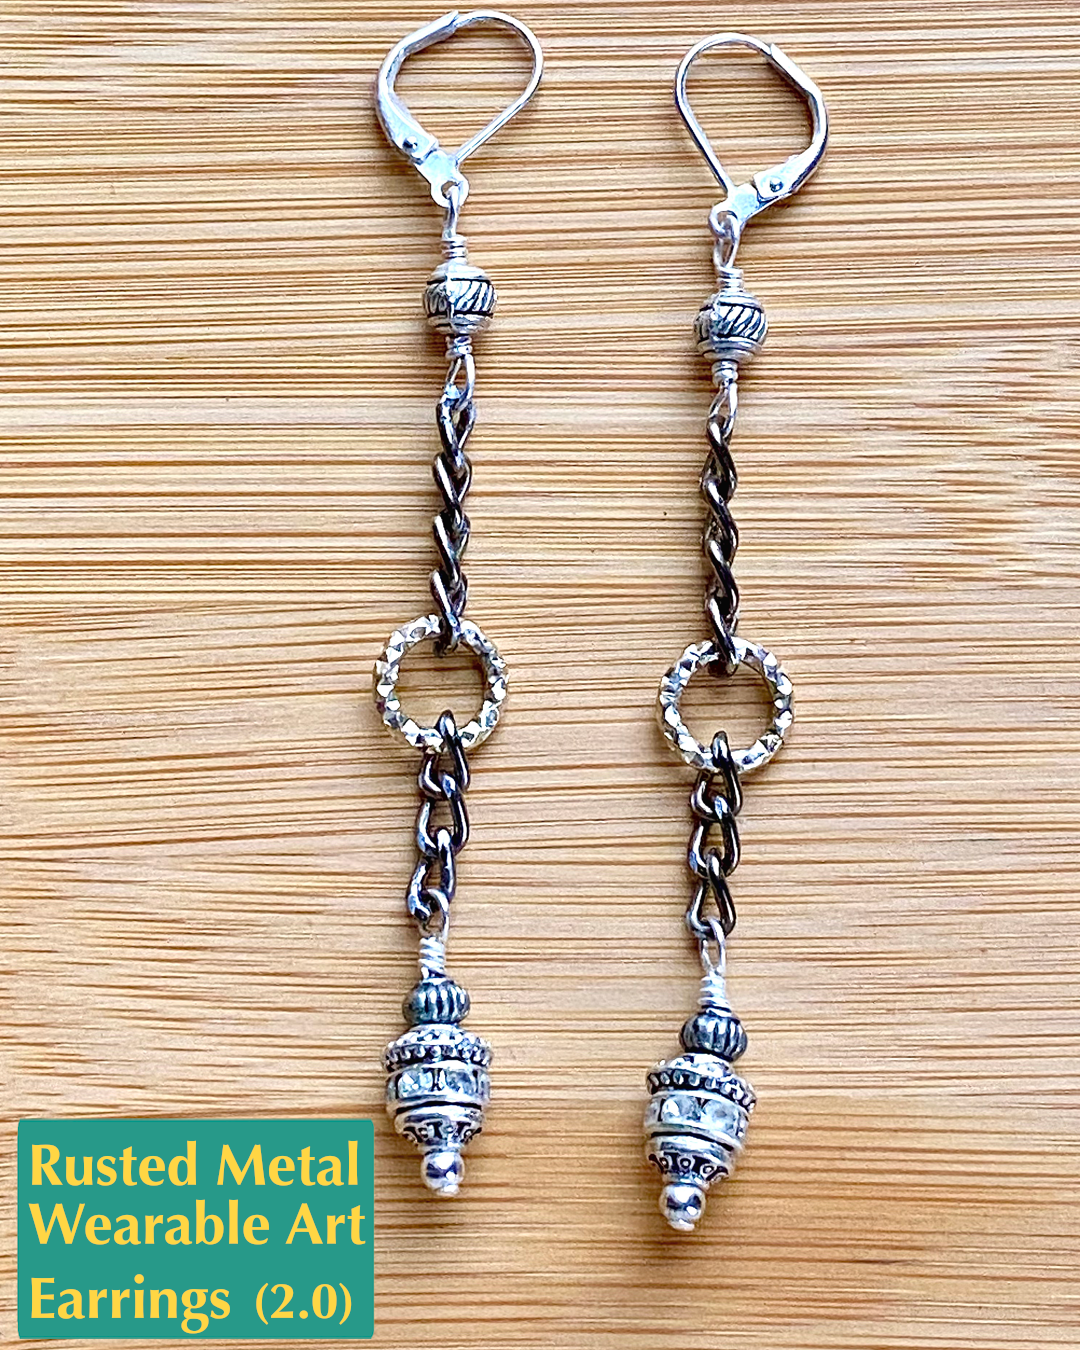 Rusted Metal Wearable Art Earrings (Available in 1.0 and 2.0)